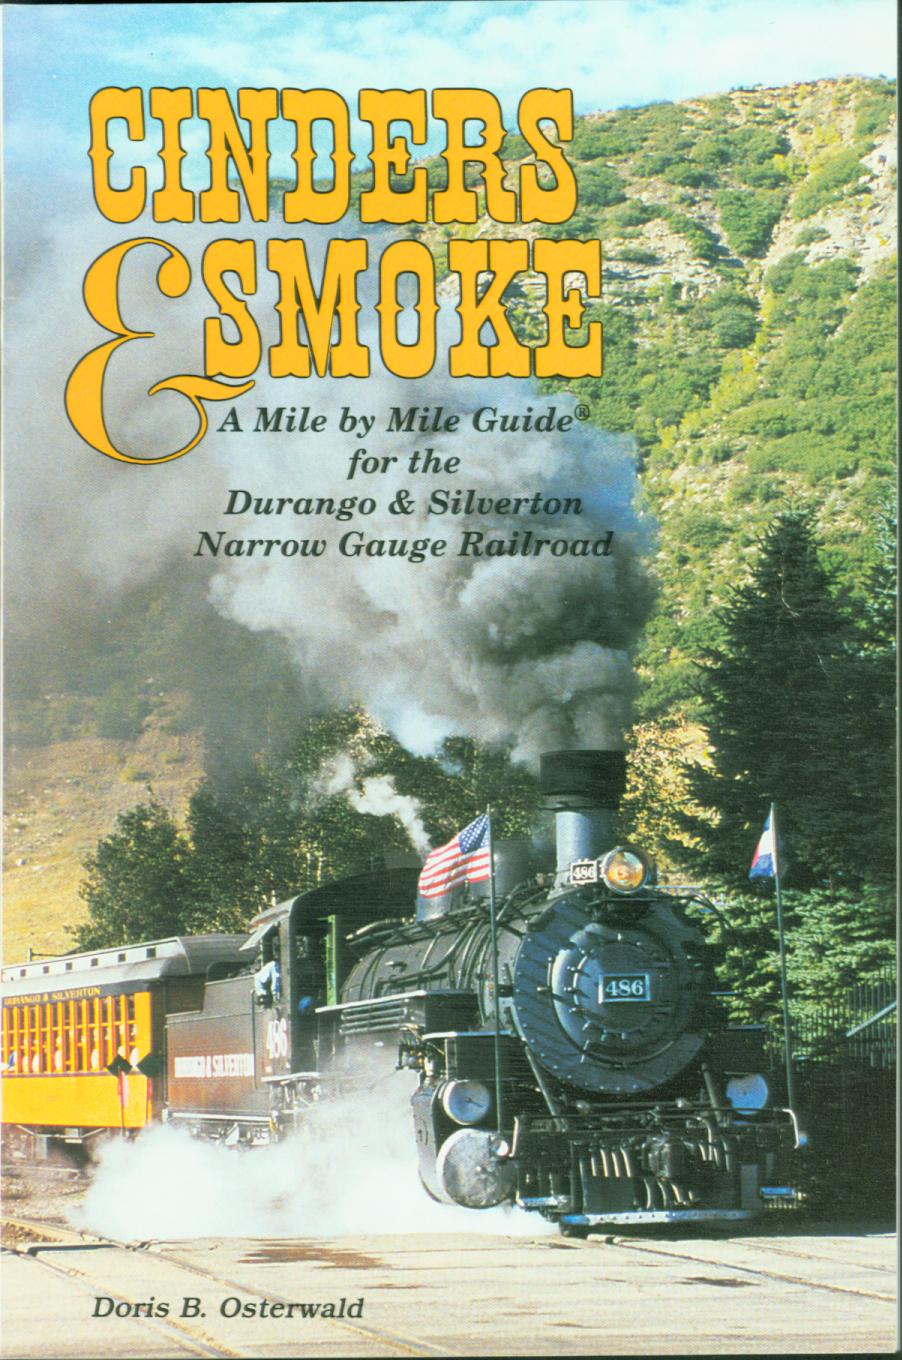 CINDERS & SMOKE: a mile by mile guide for the Durango & Silverton Narrow Gauge Railroads.